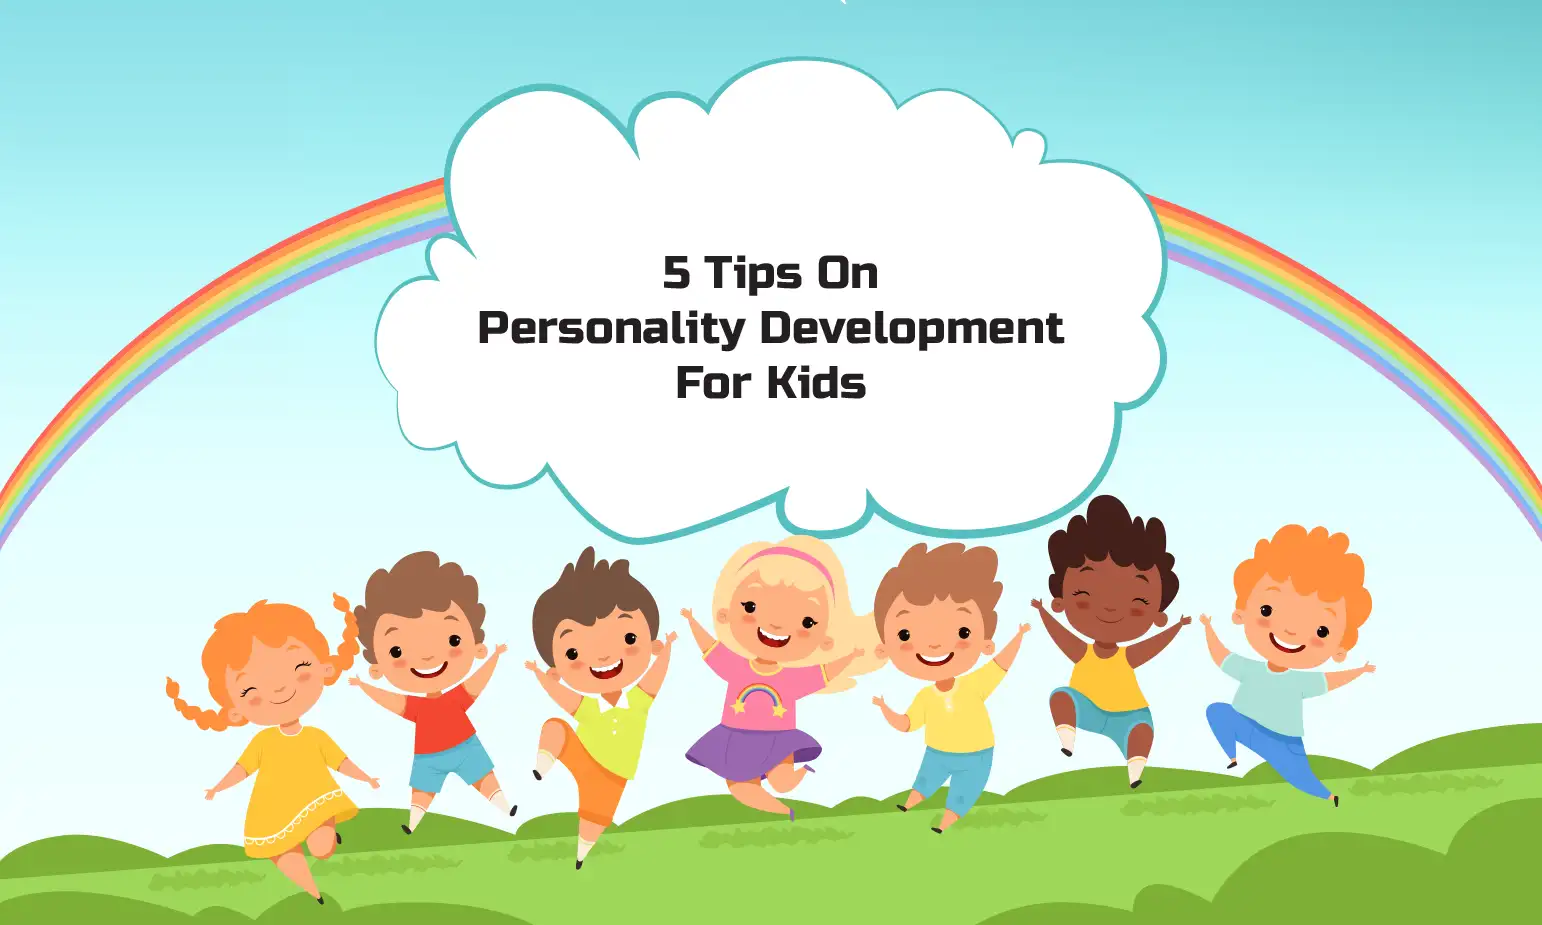 5 Tips On Personality Development For Kids